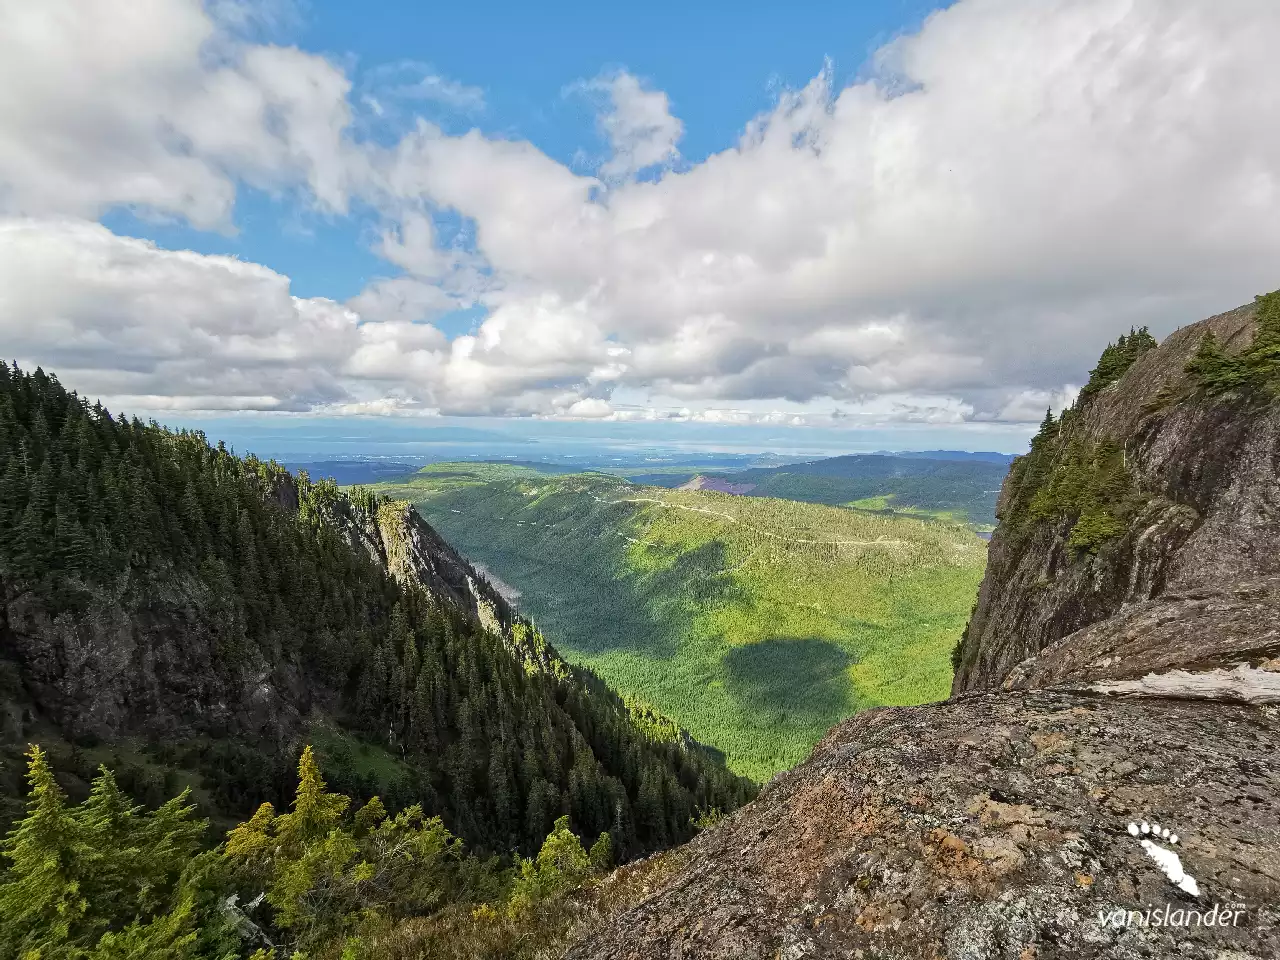 Wide view of the clouds and Mountains from Mount Moriarty & Labour Day Lake - Port Alberni,  Vancouver Island